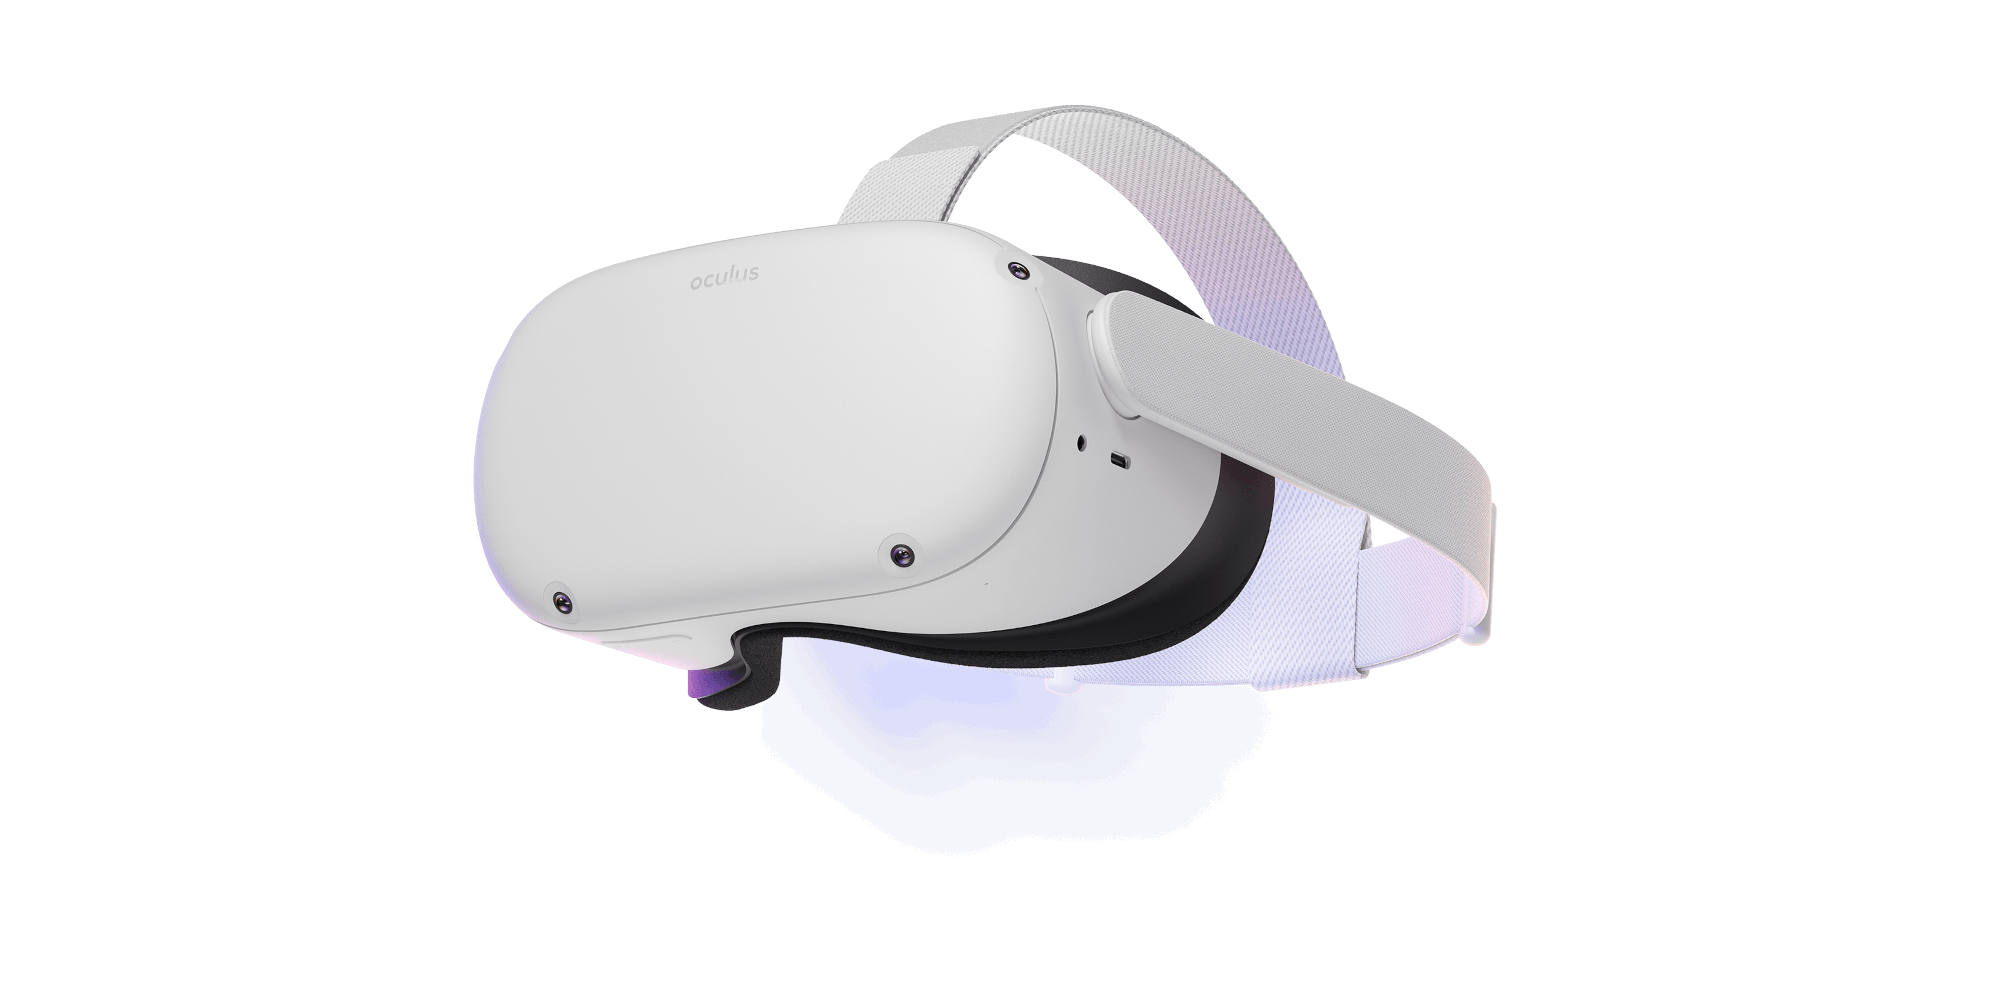 oculus quest 2 in front of white background